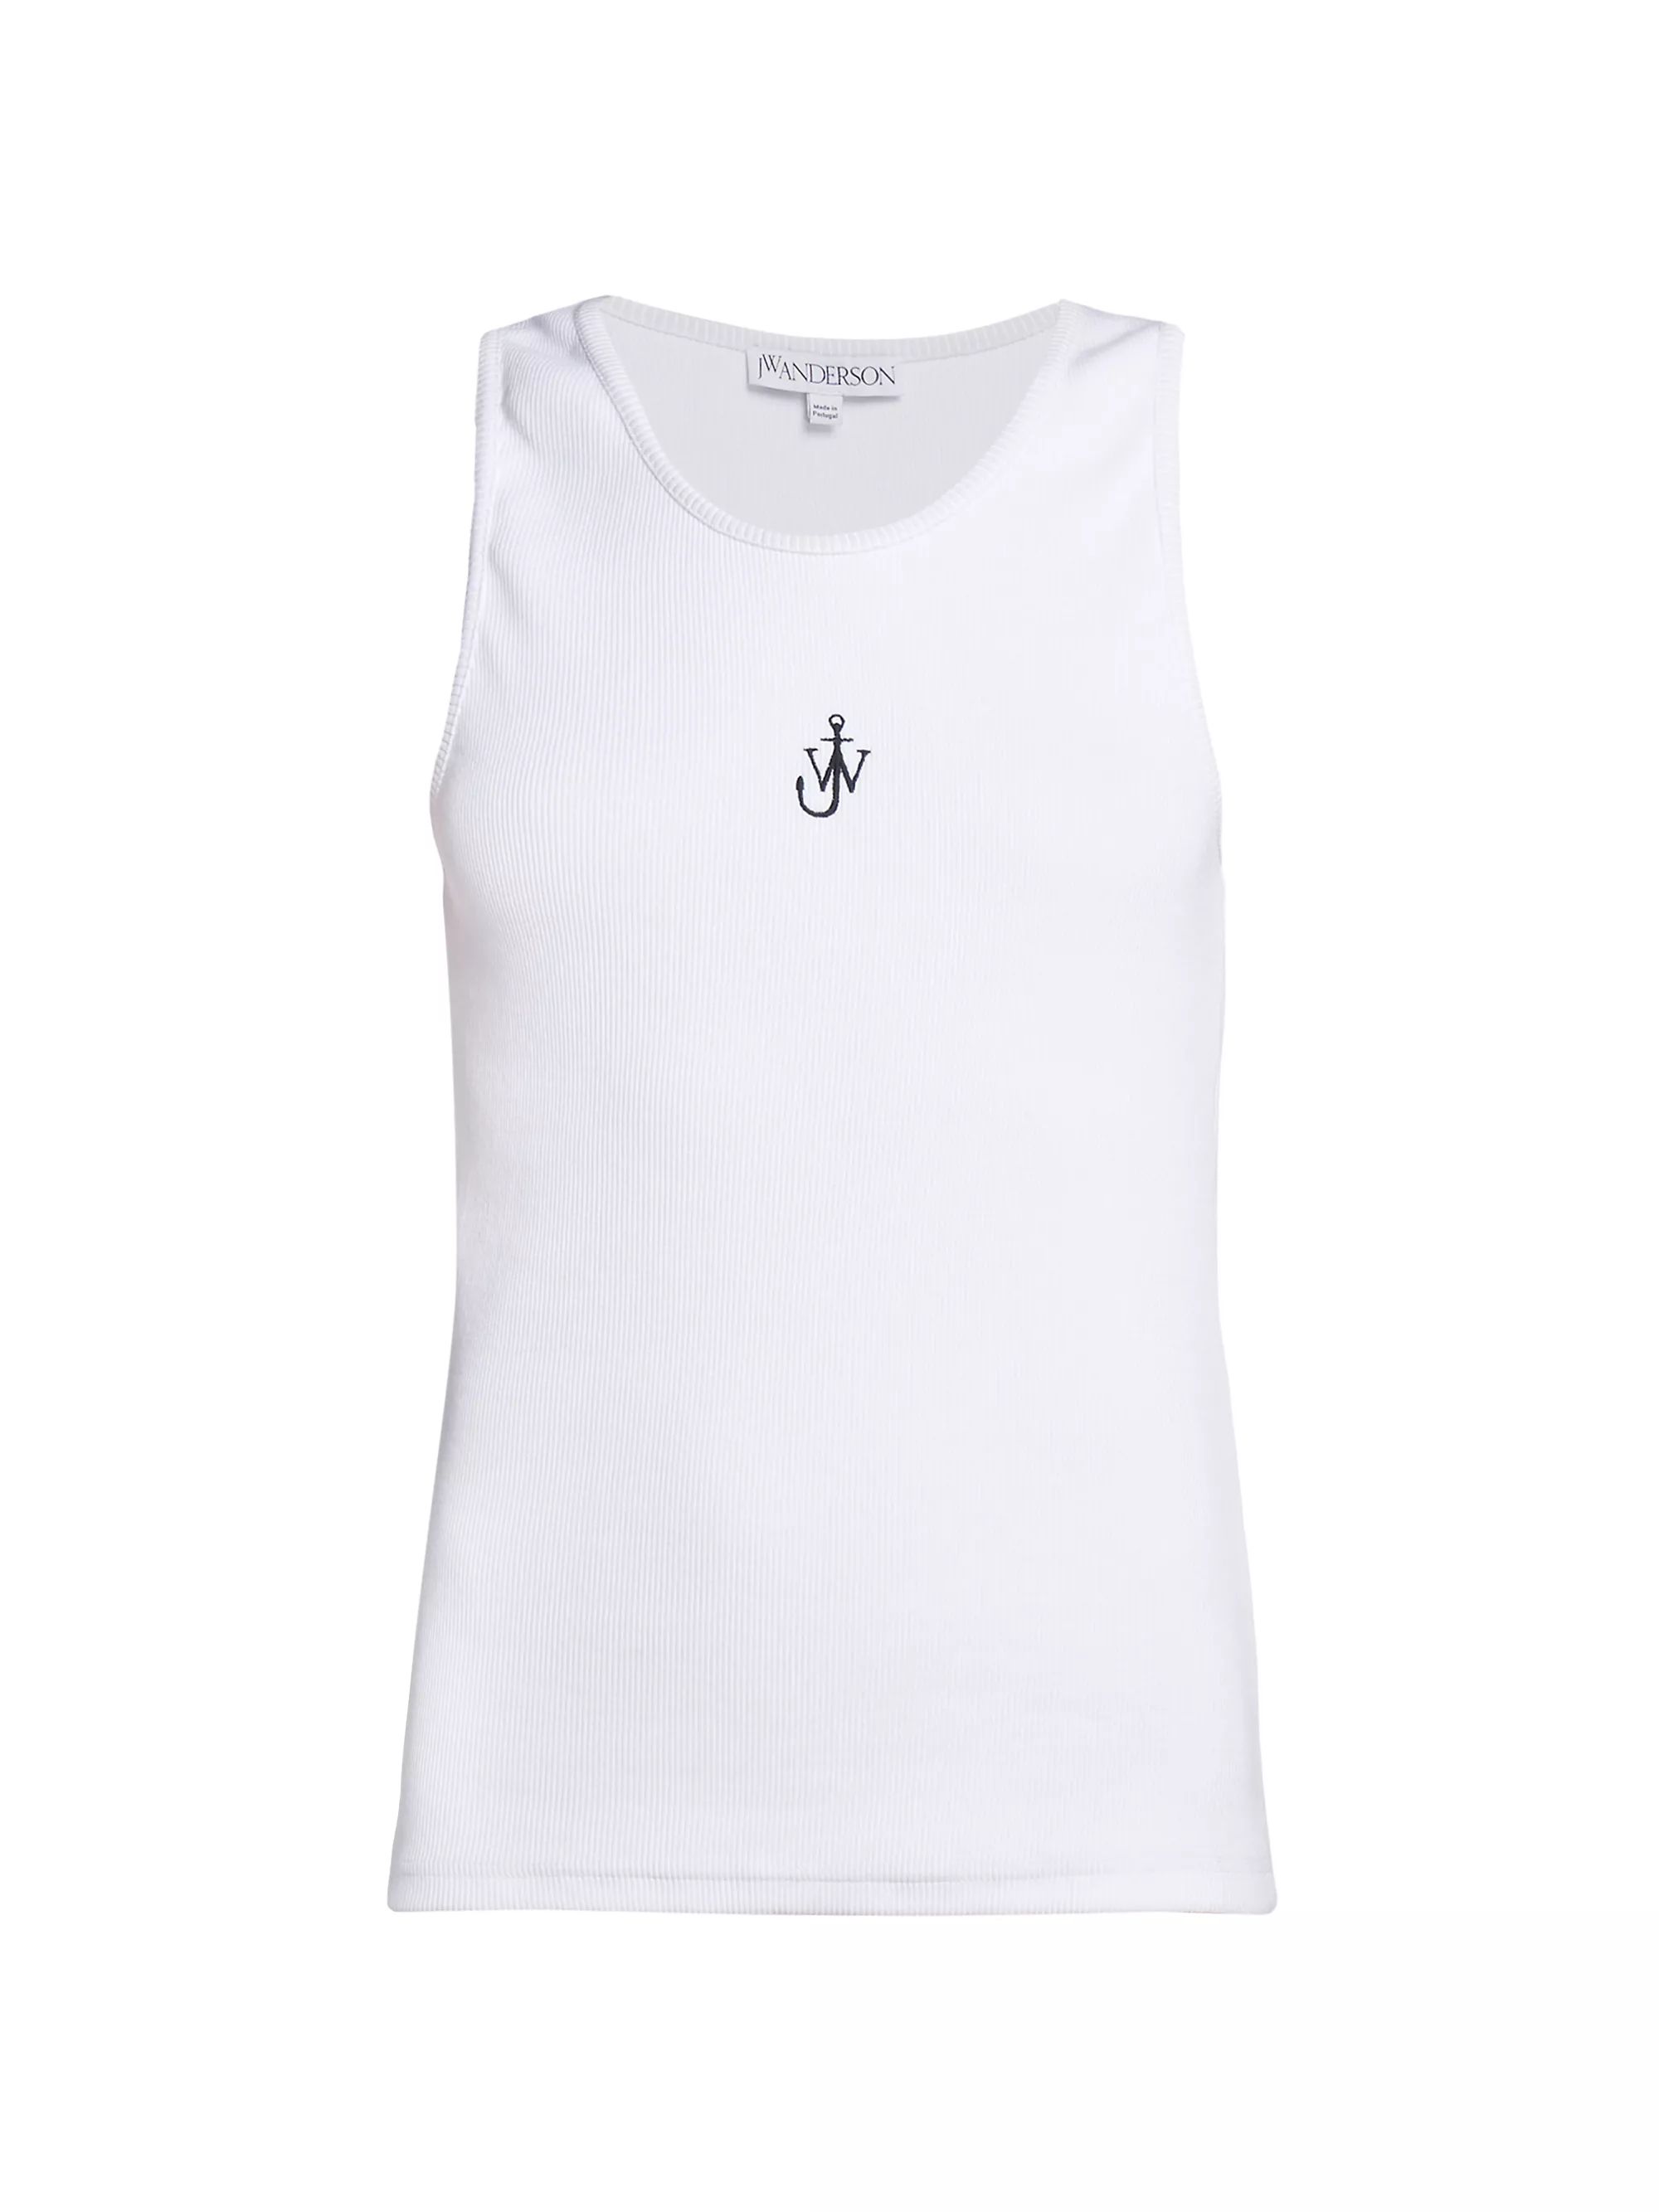 Embroidered Anchor Tank | Saks Fifth Avenue